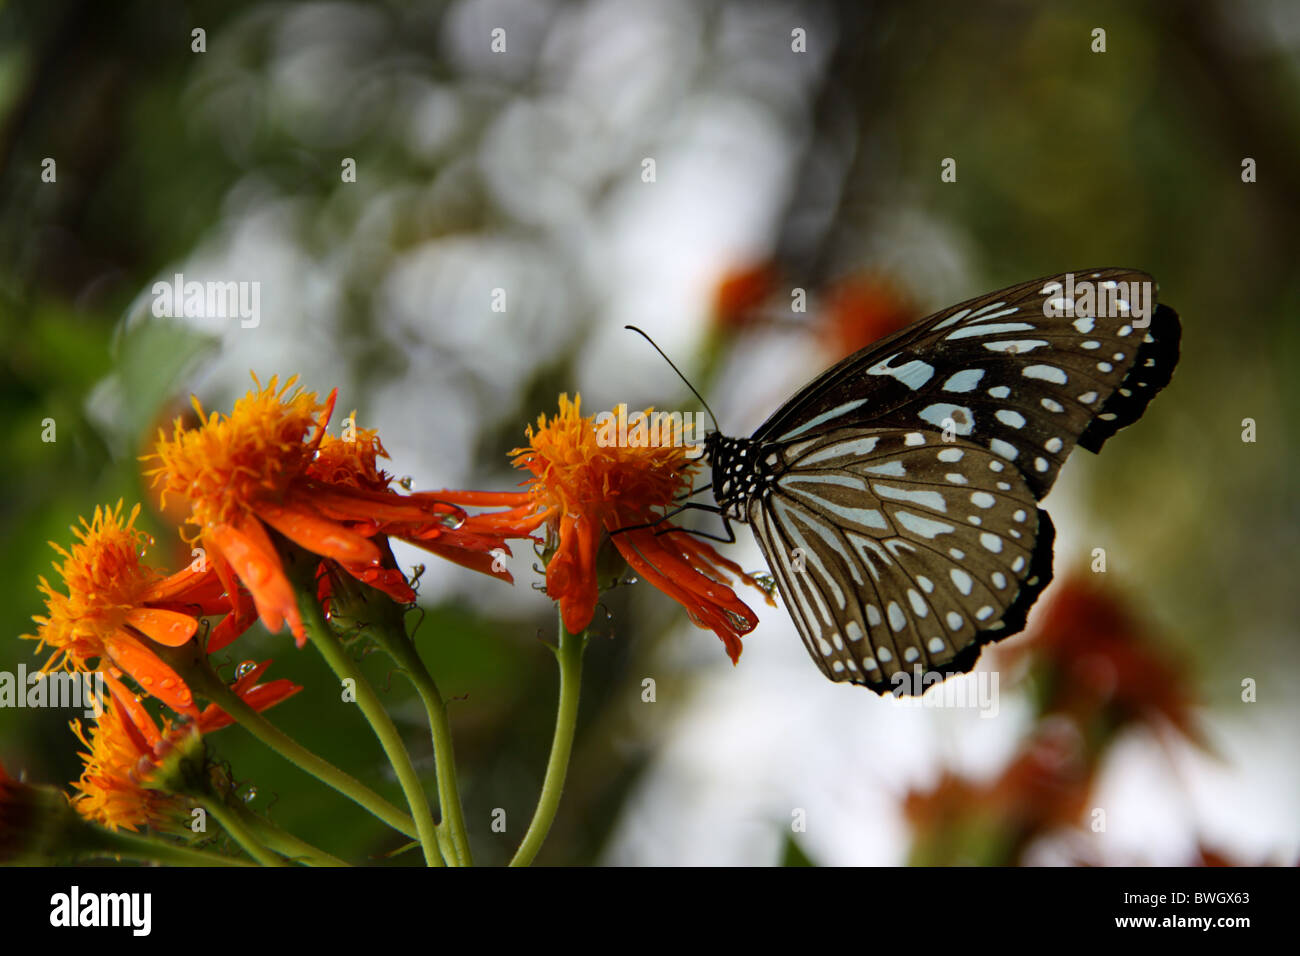 Blue tiger butterfly on a flower Stock Photo